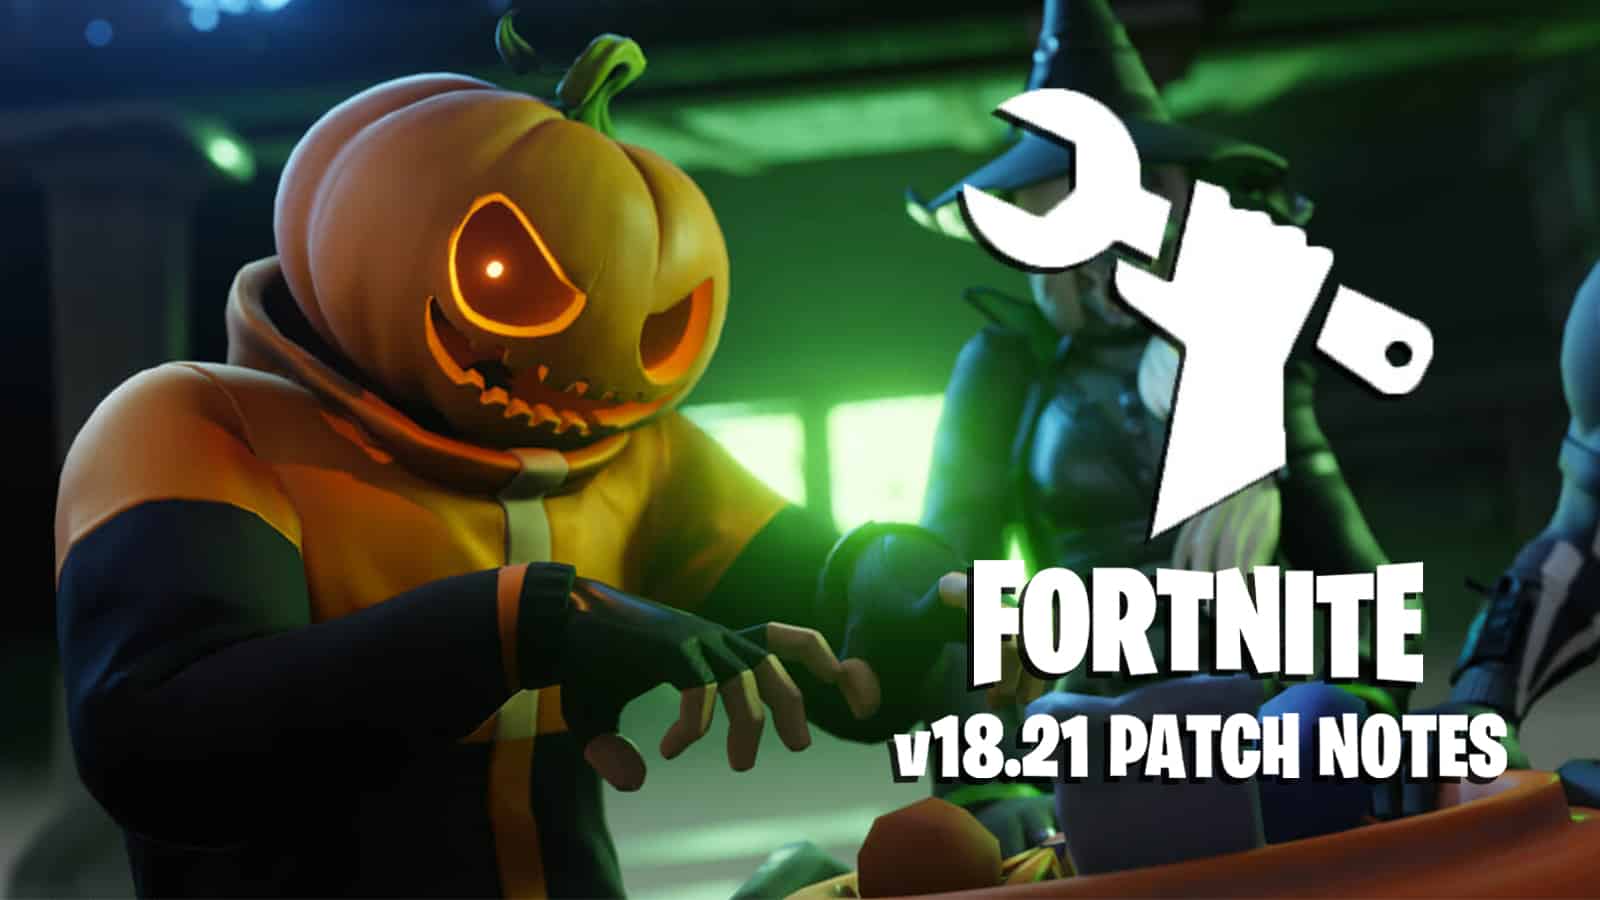 A pumpkin Fortnite skin and text reading 12.1 patch notes